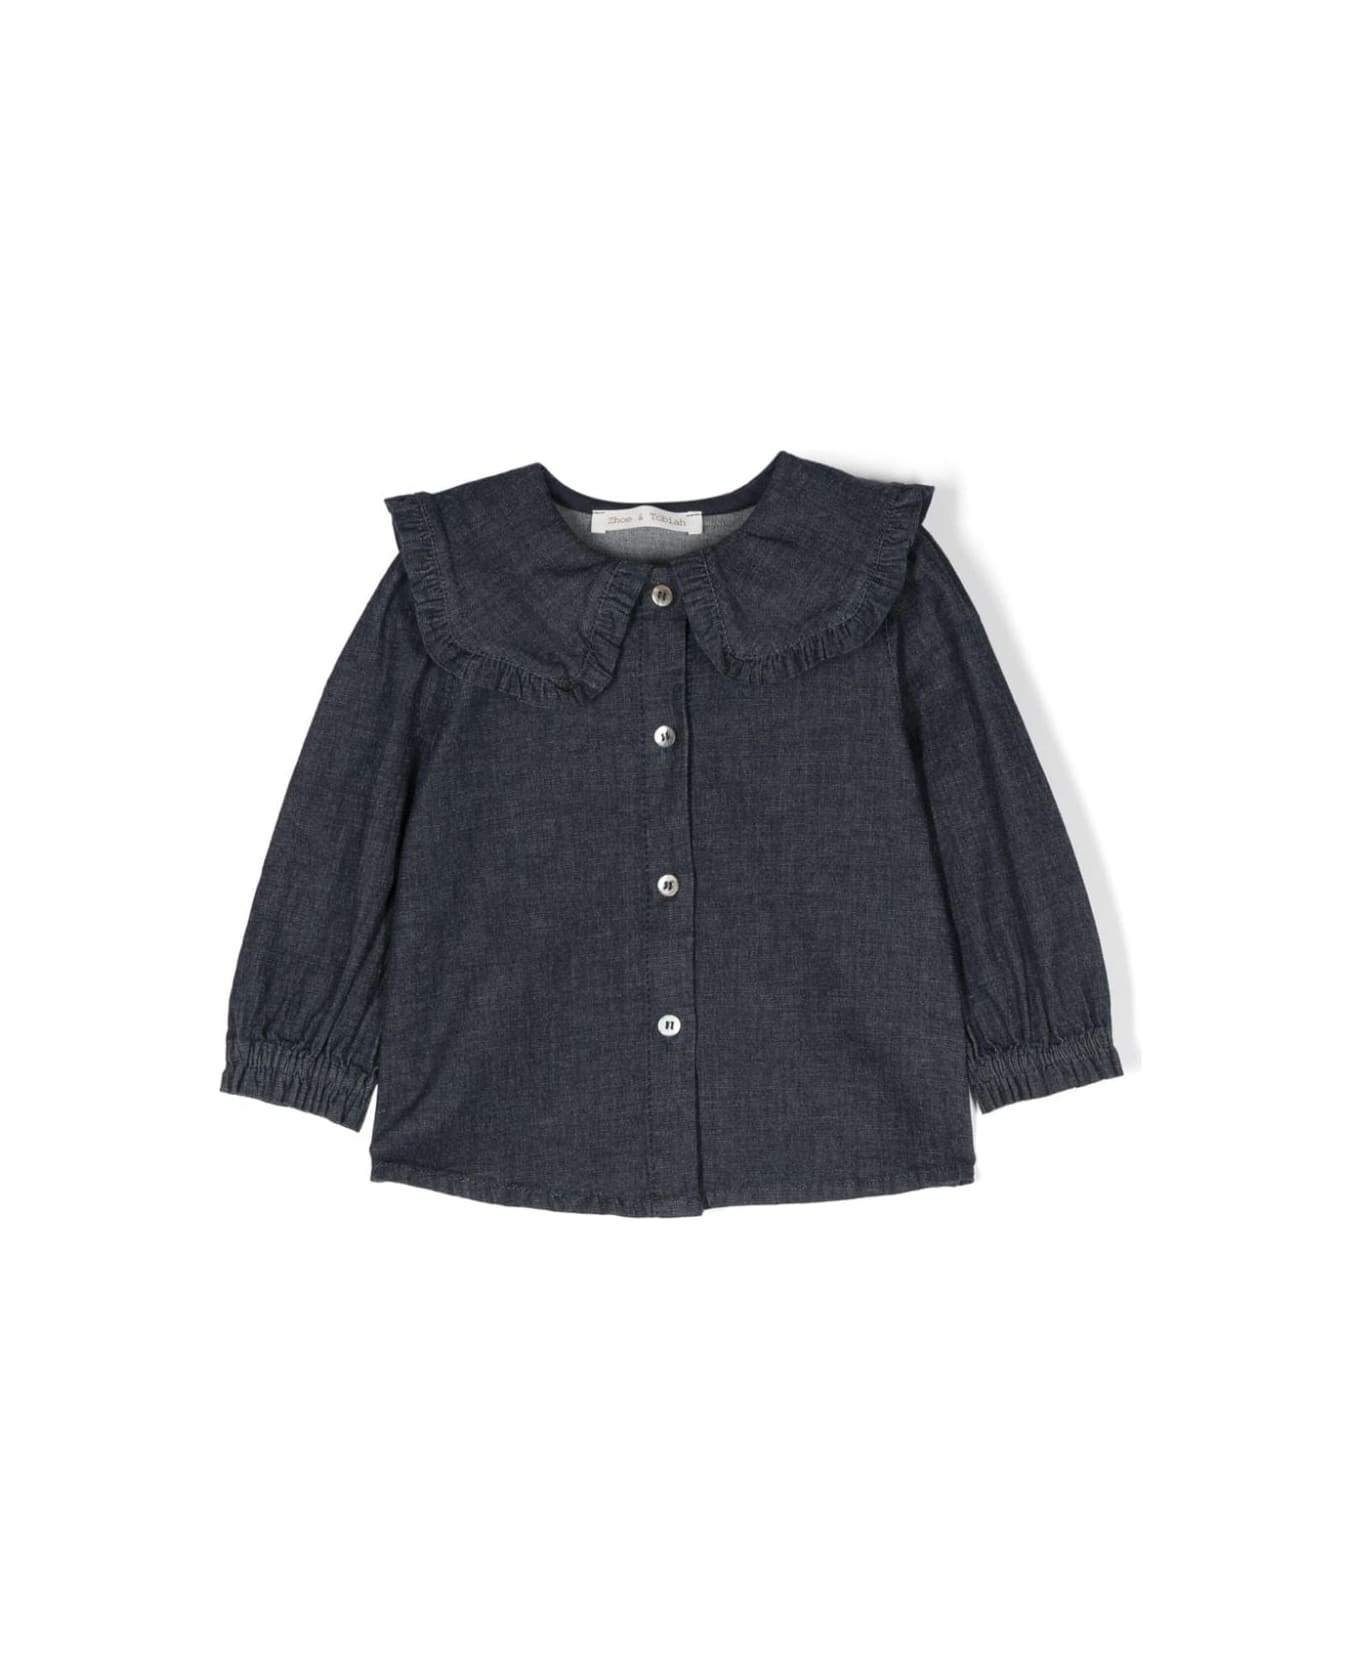 Zhoe & Tobiah Blusa Con Ruches - Variante unica シャツ